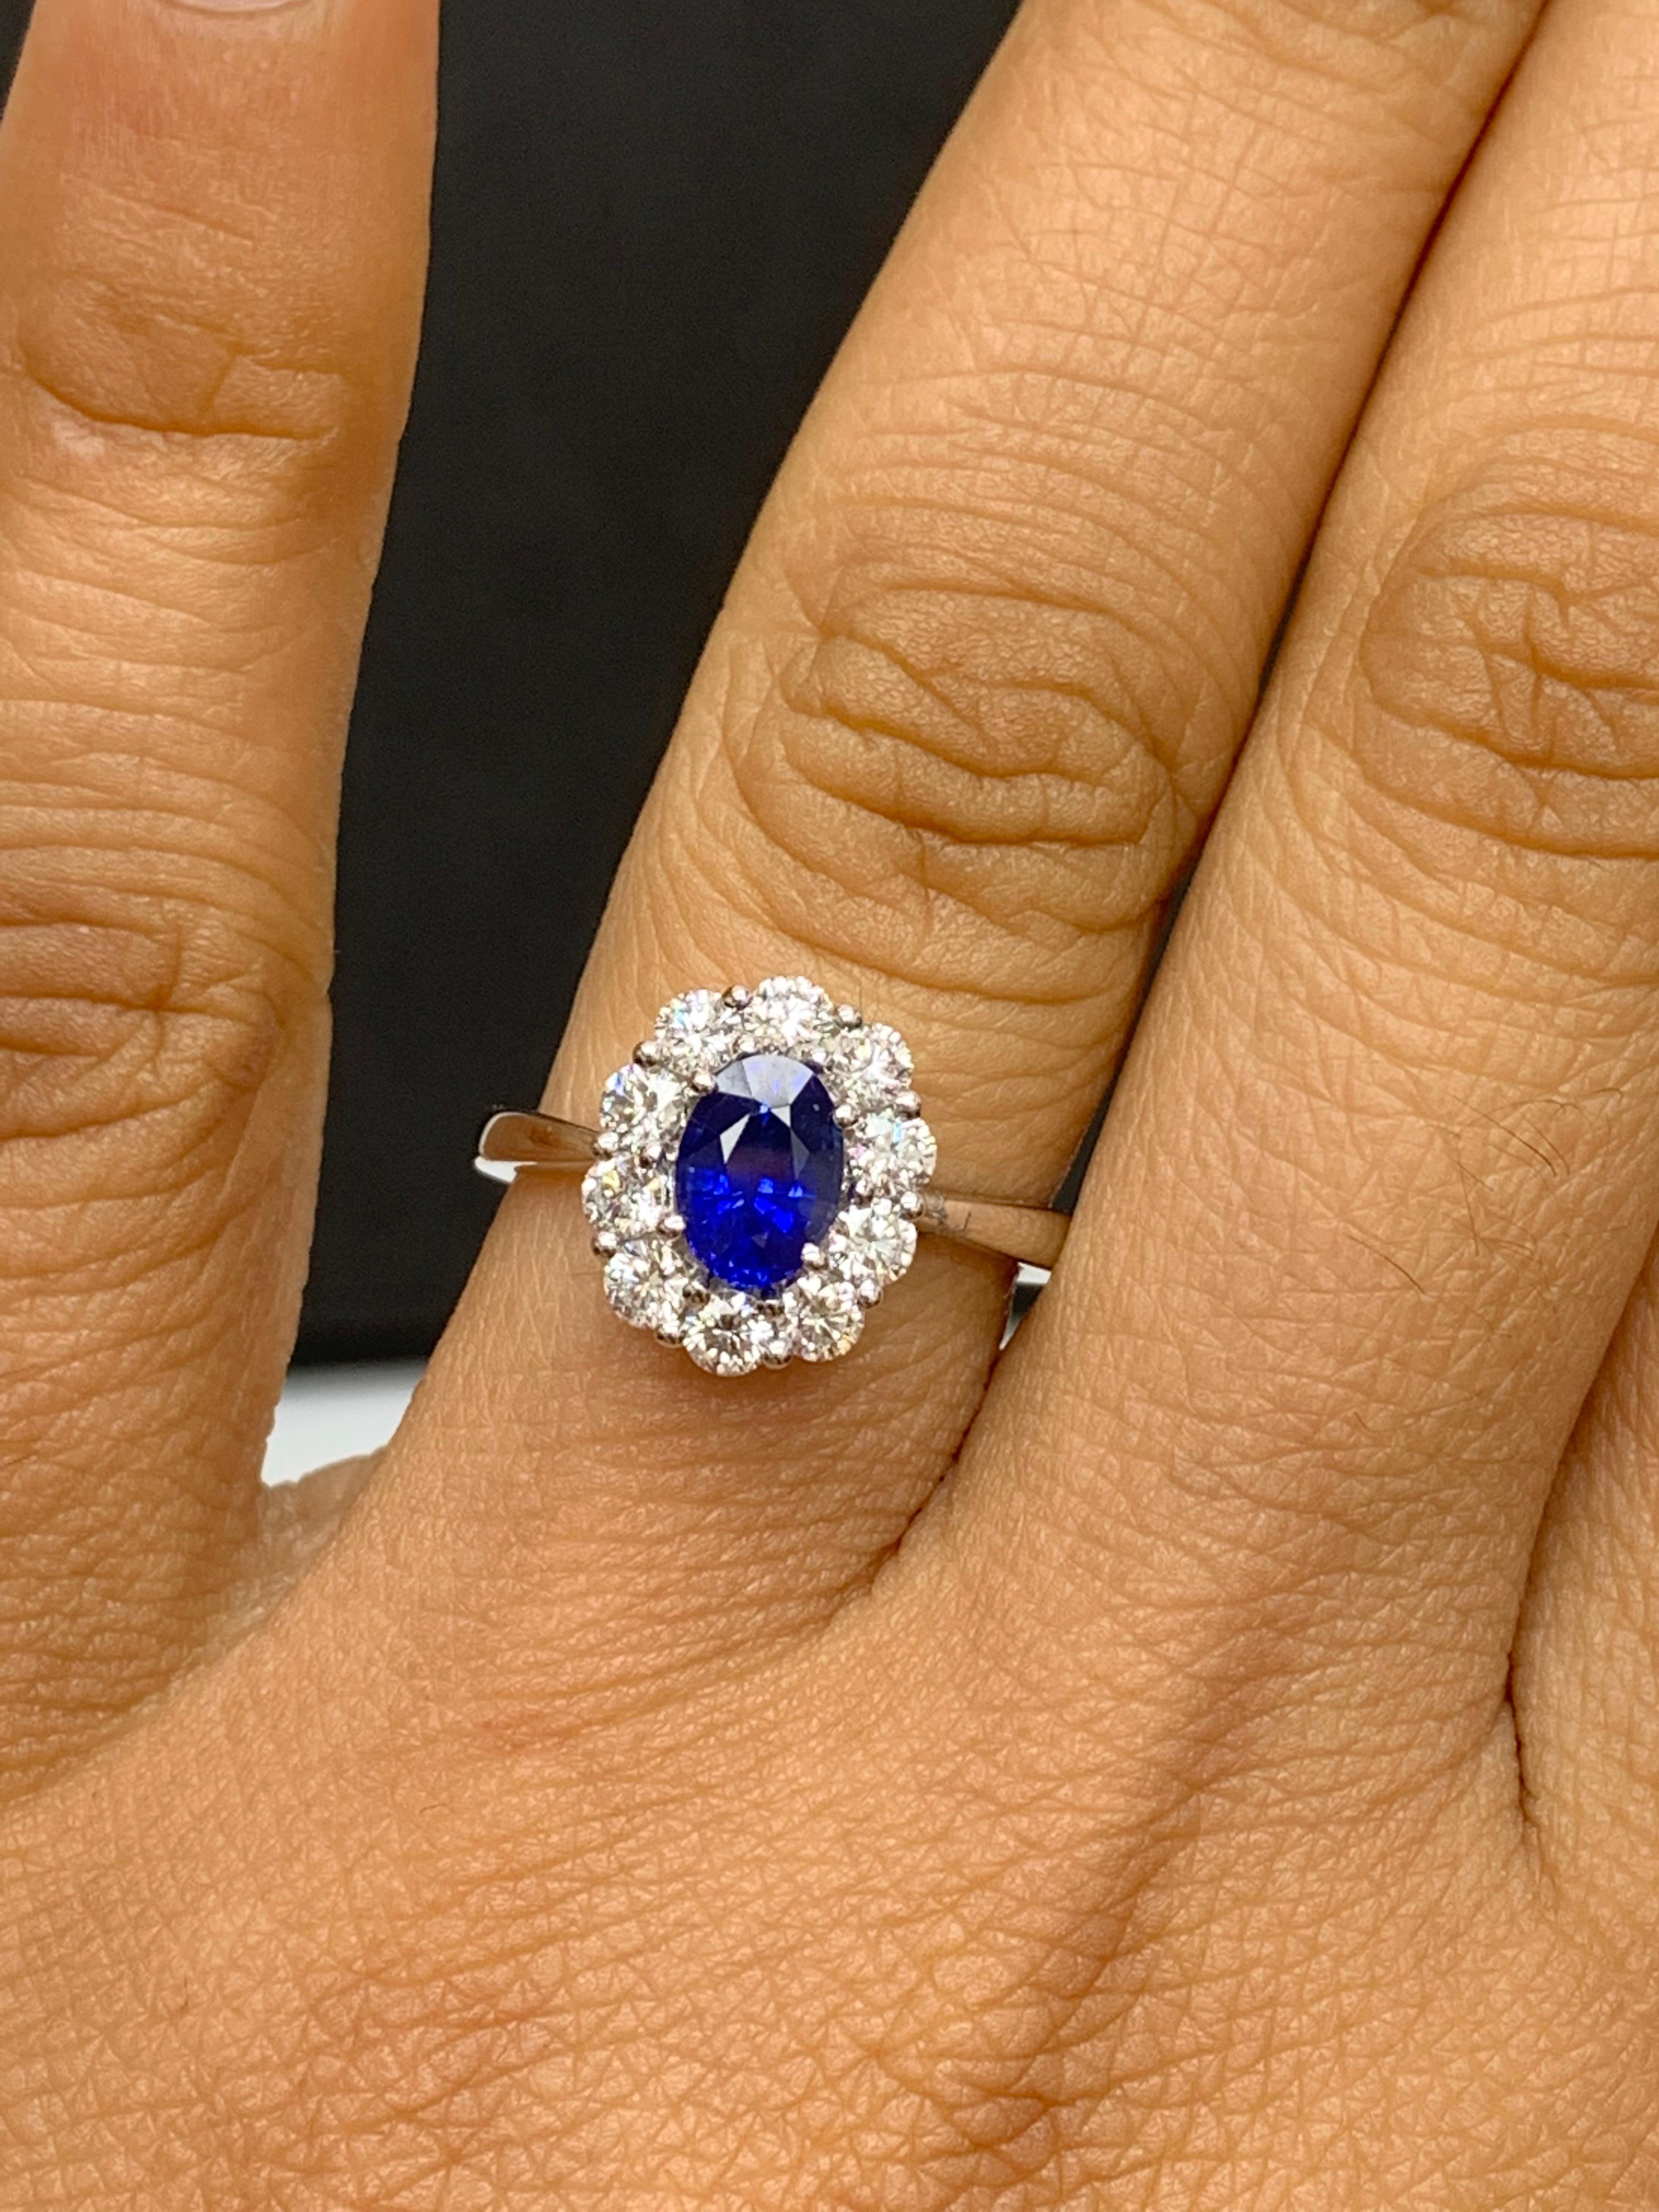 A stunning well-crafted engagement ring showcasing a 0.91-carat oval cut Blue Sapphire. Flanking the center diamond are perfectly matched brilliant cut 10 diamonds weighing 0.74 carats in total, set in a polished 18K White Gold mounting. Handcrafted